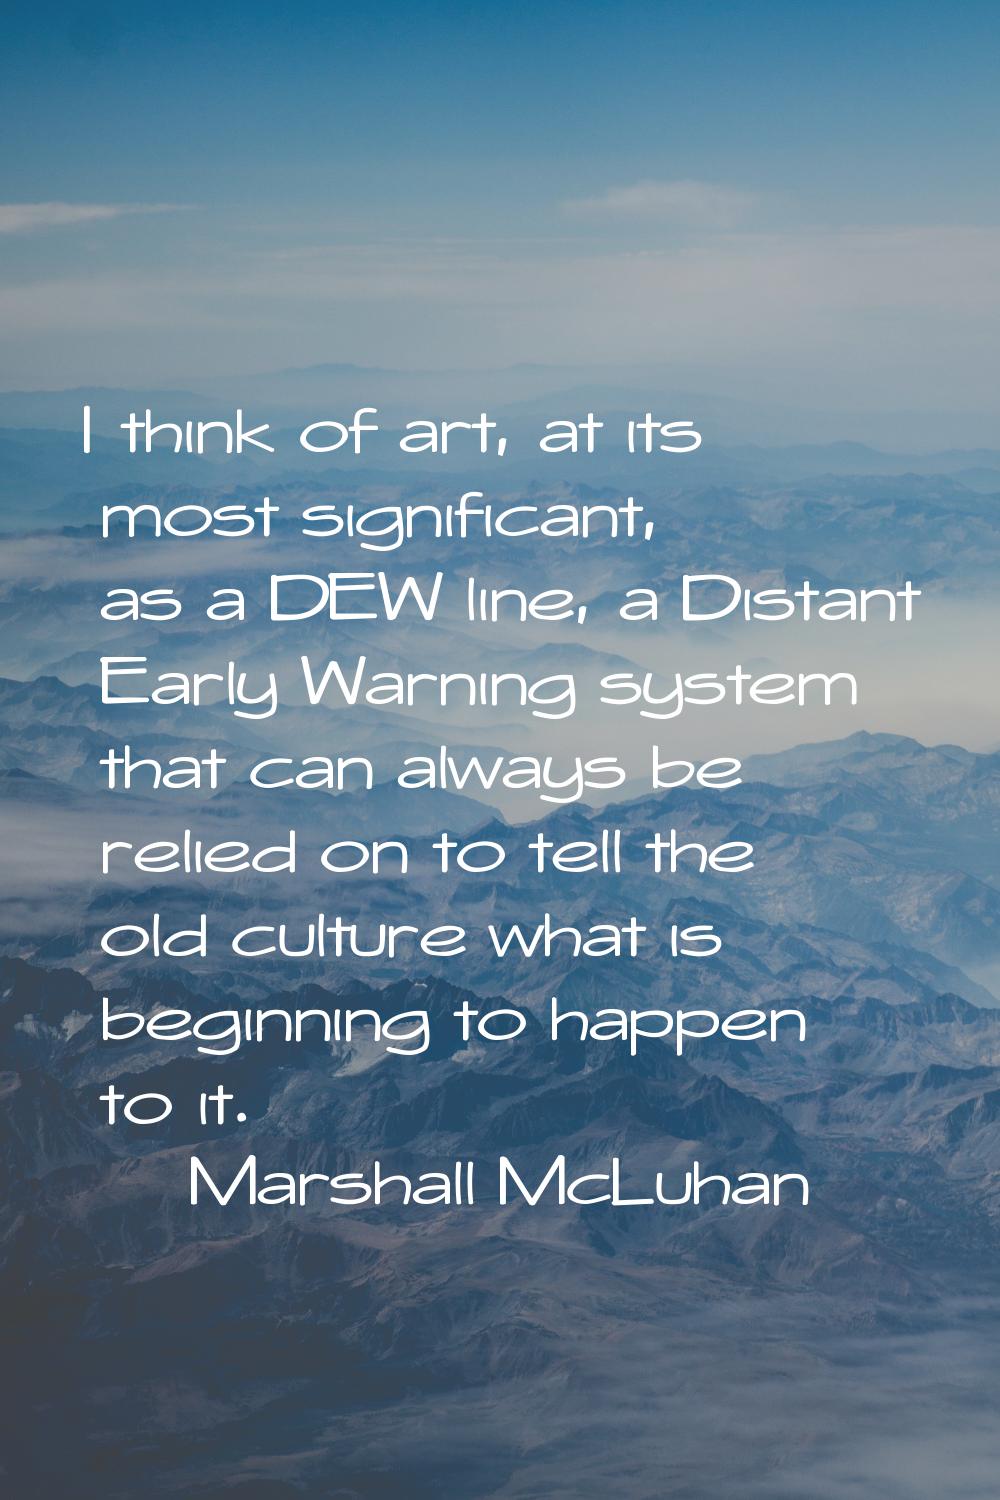 I think of art, at its most significant, as a DEW line, a Distant Early Warning system that can alw